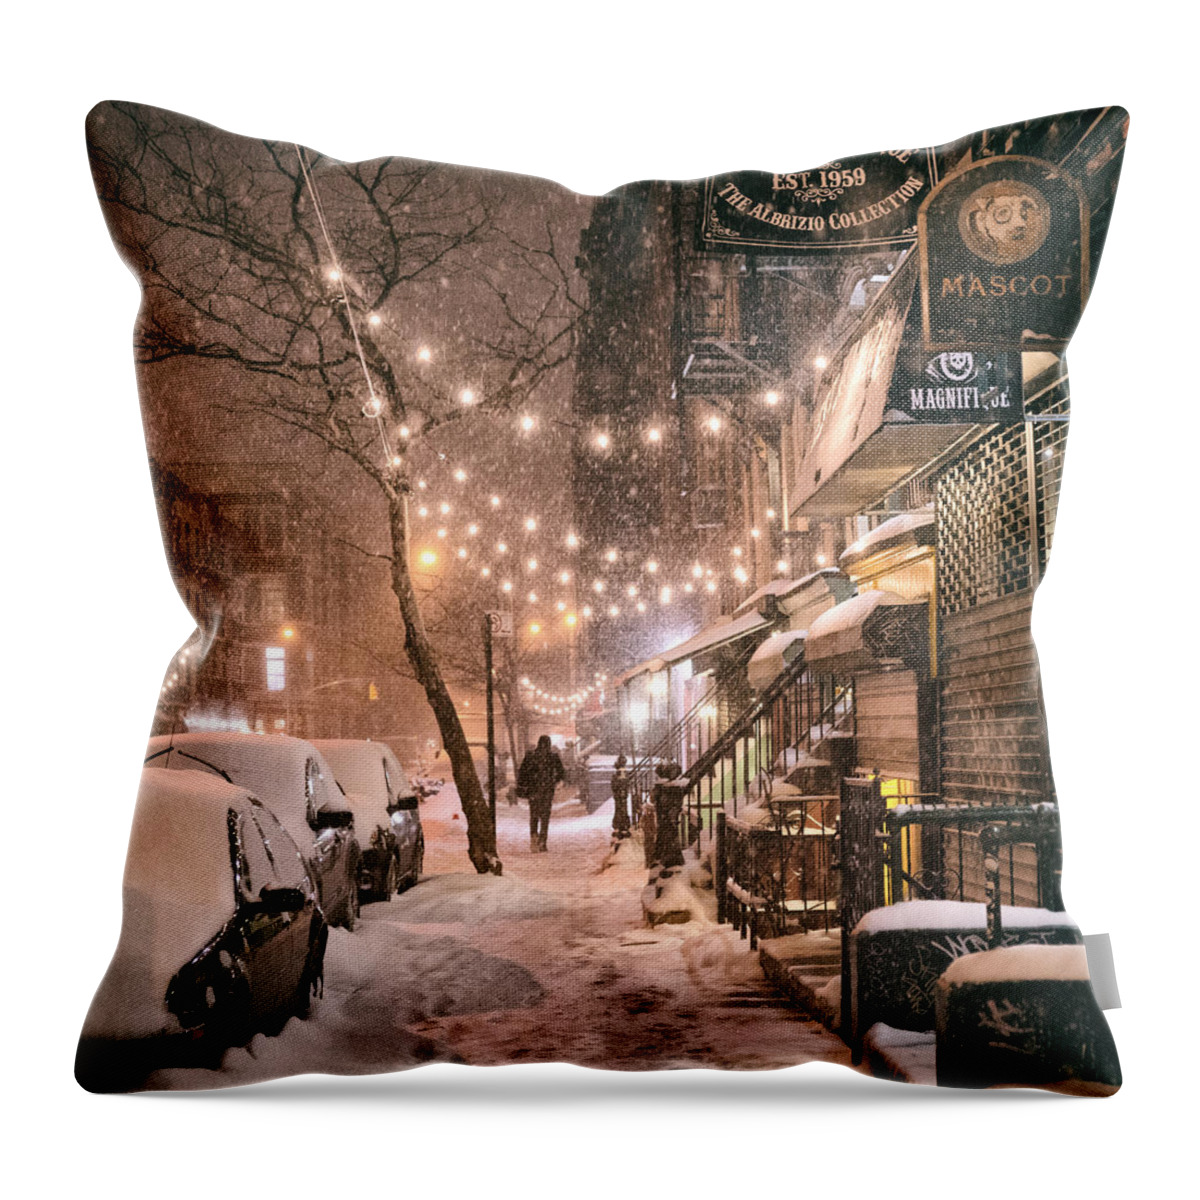 Nyc Throw Pillow featuring the photograph New York City - Winter Snow Scene - East Village by Vivienne Gucwa